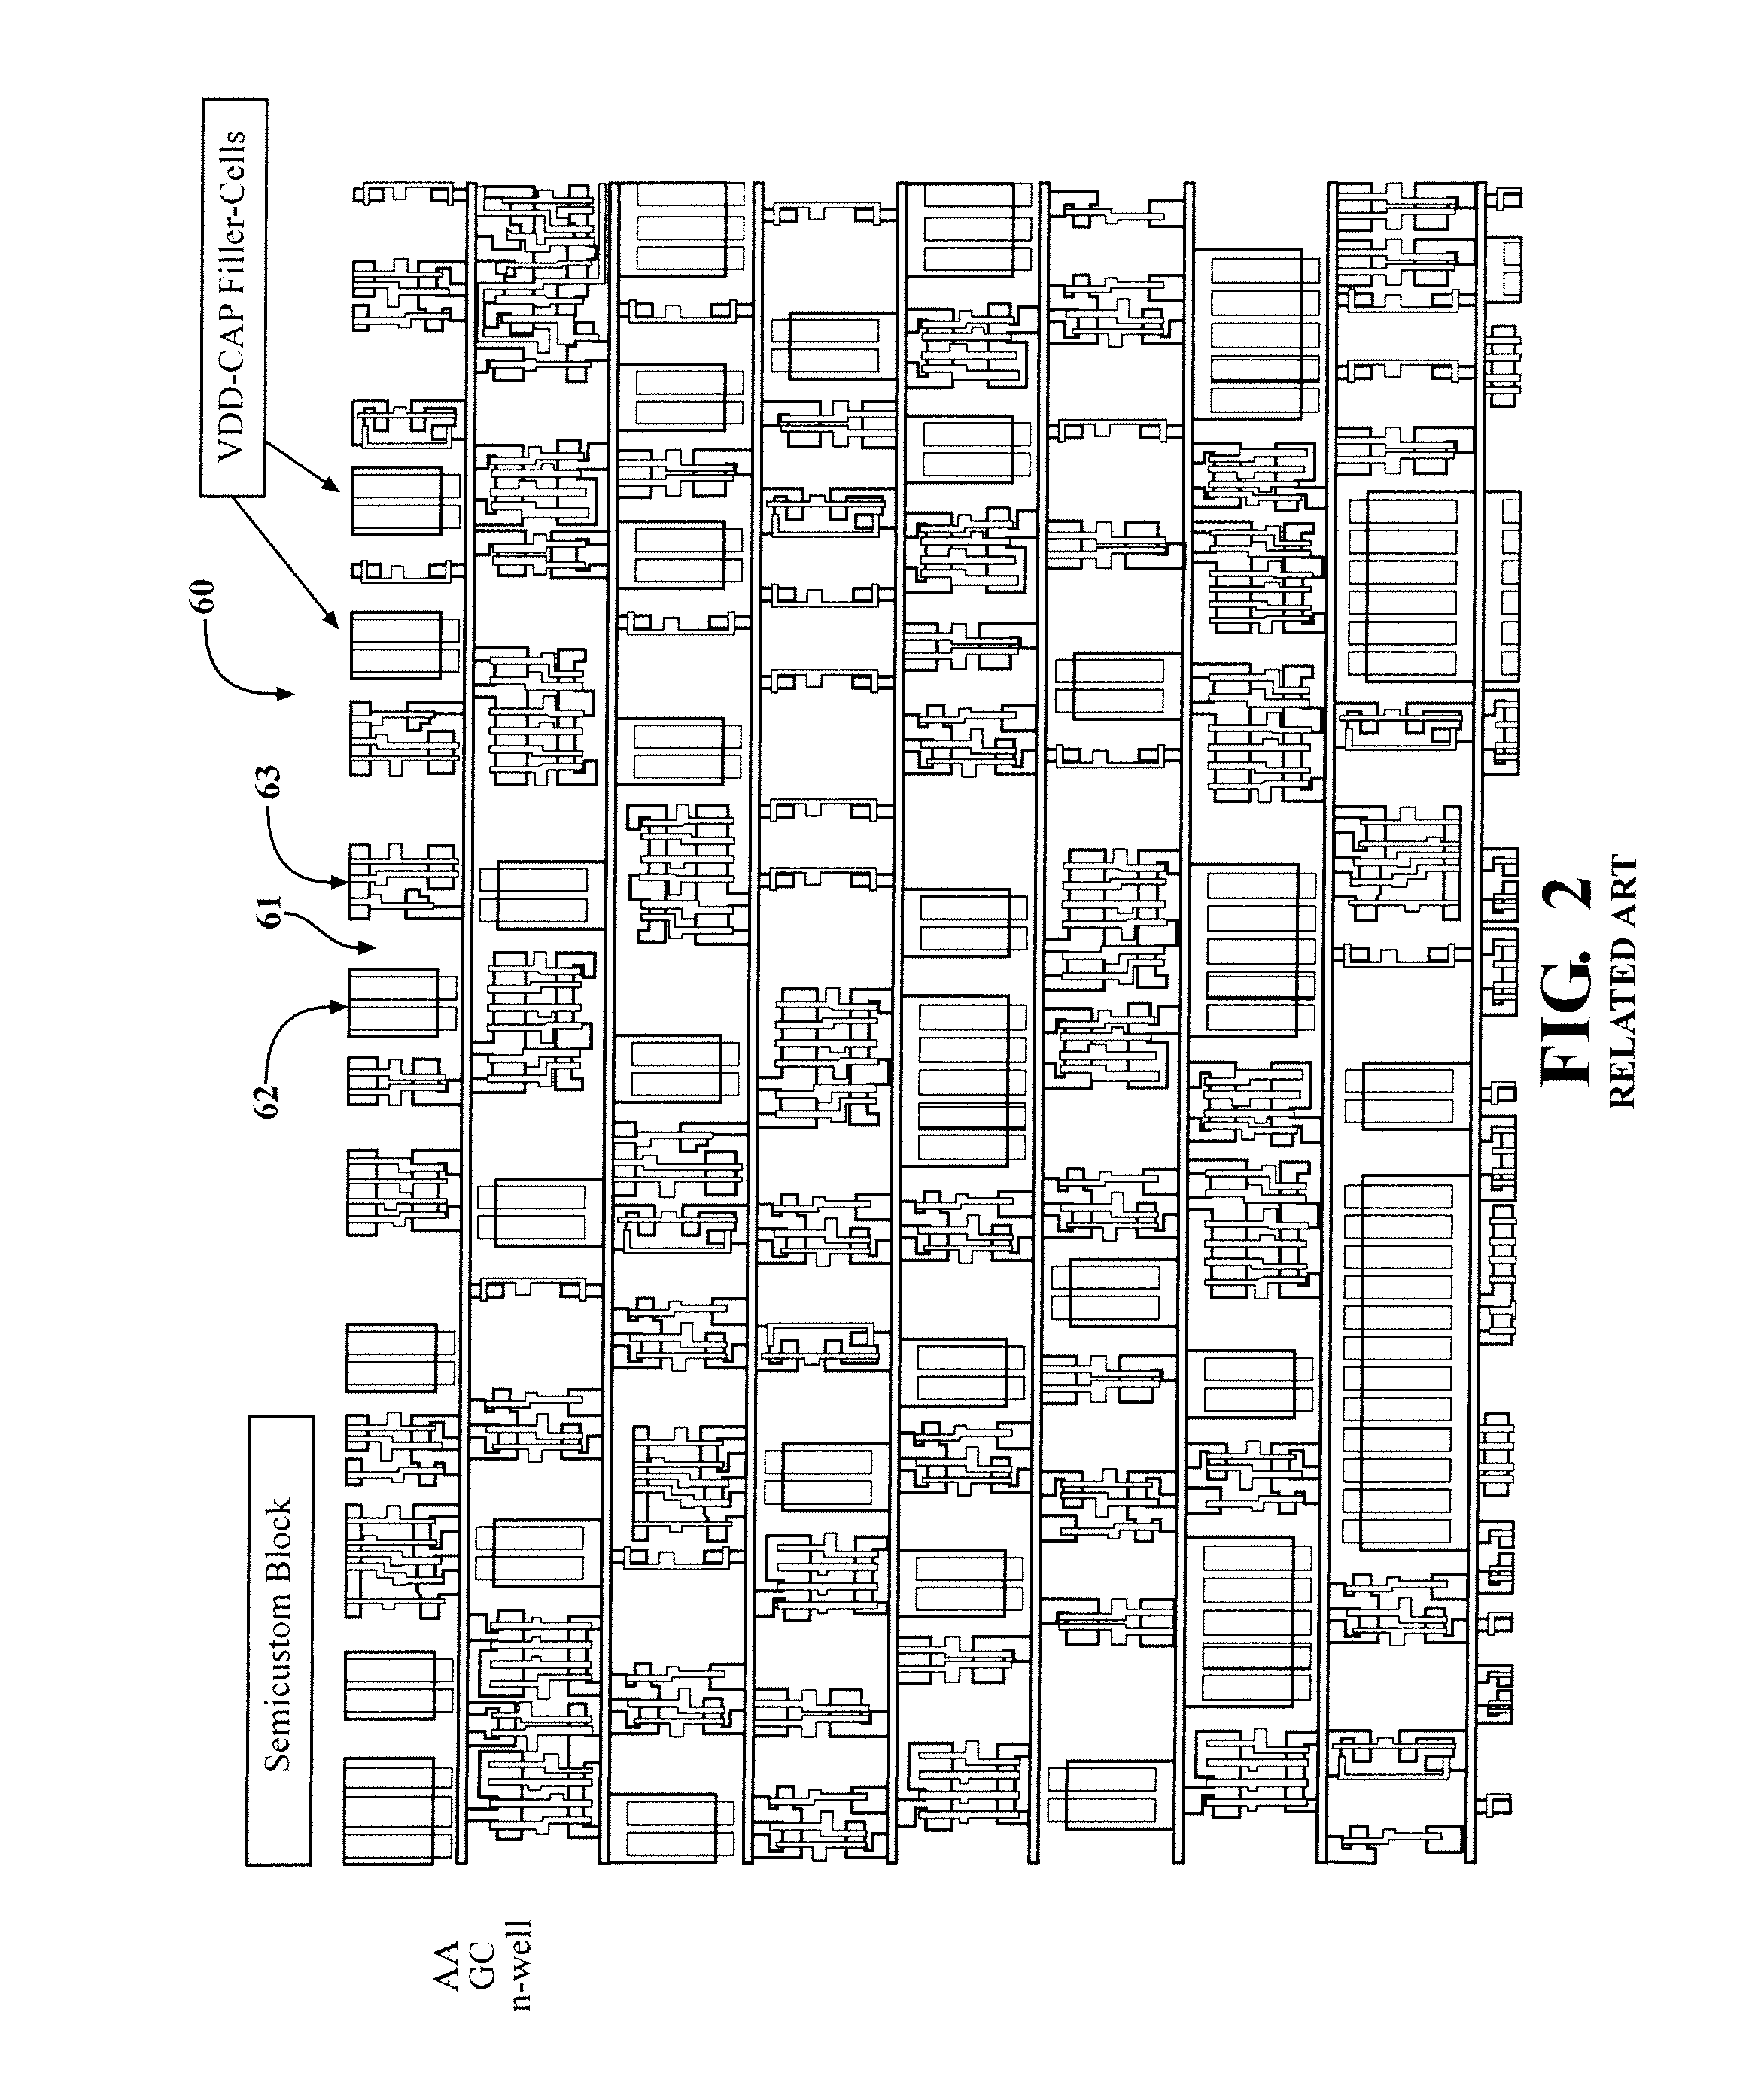 Shallow trench isolation area having buried capacitor